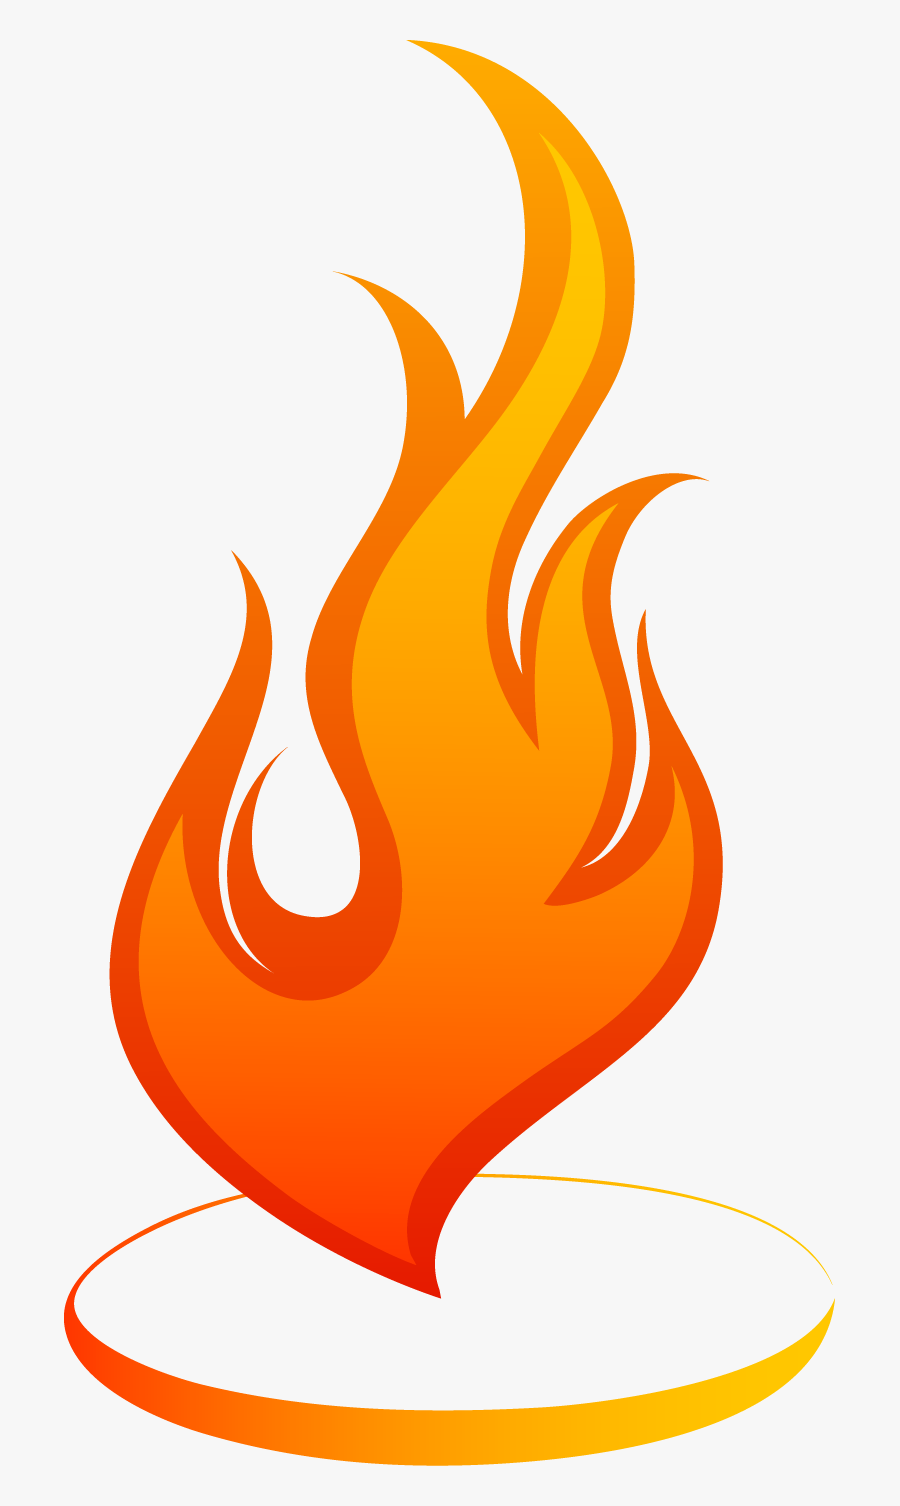 Explosion, Fiery, Fireball, Flaming, Flammable, Frame, - Frame Of Fire, Transparent Clipart